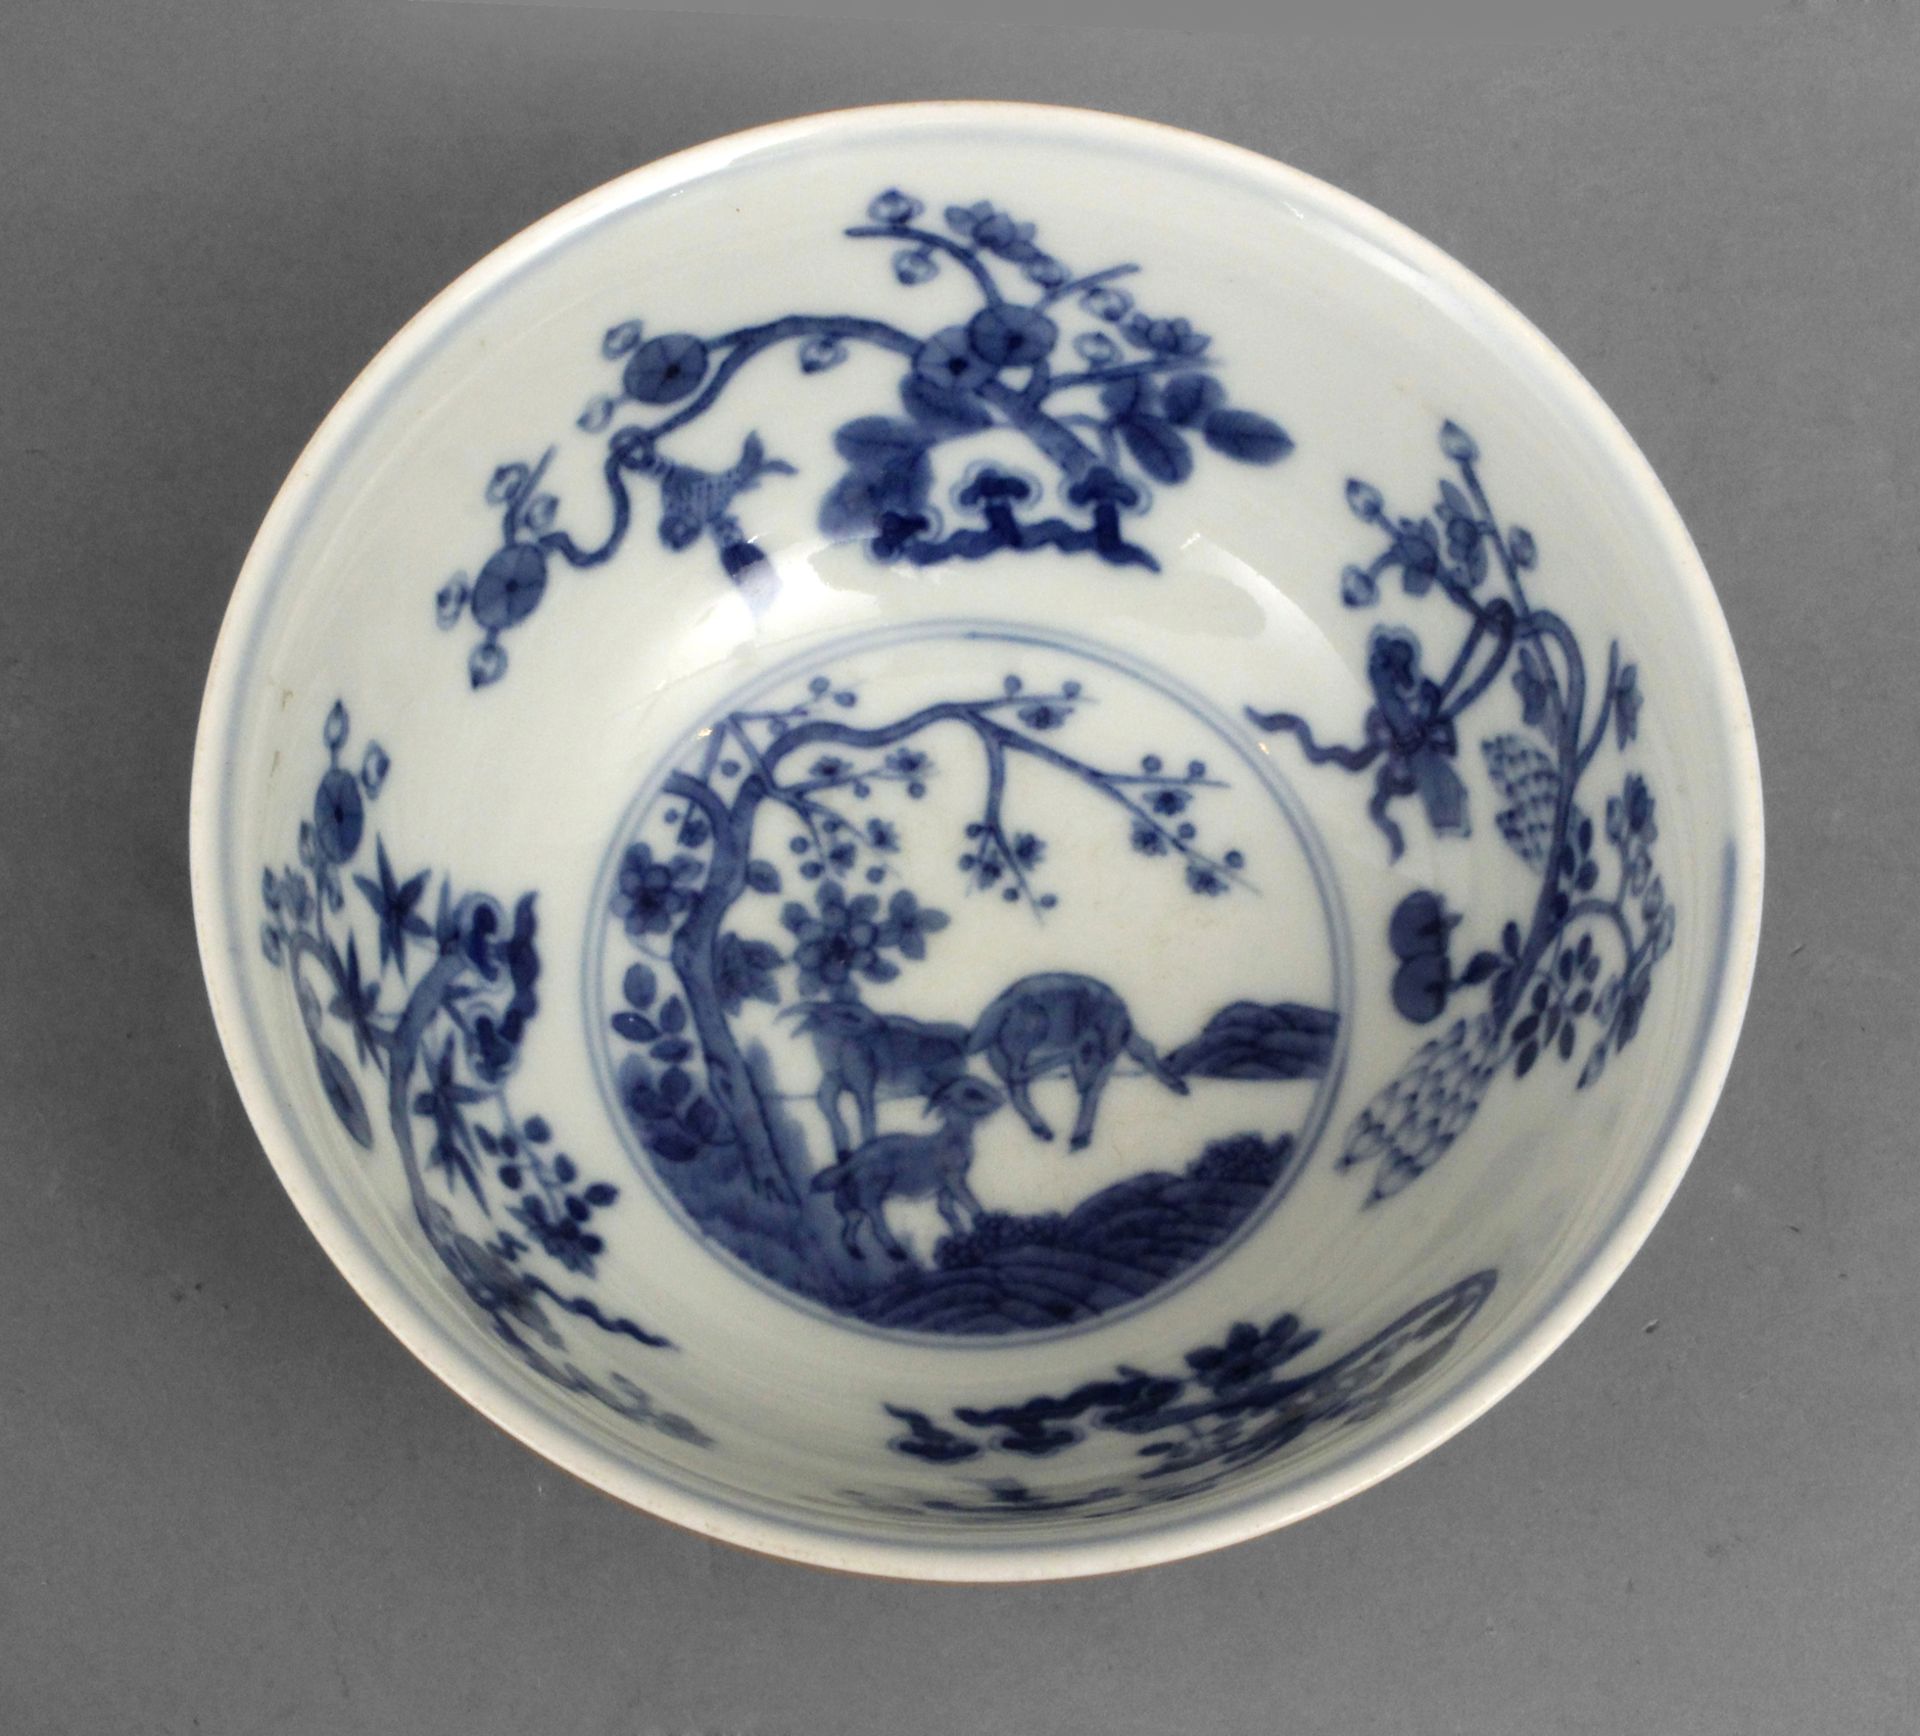 Late 19th century-early 20th century Chinese porcelain bowl - Image 4 of 5